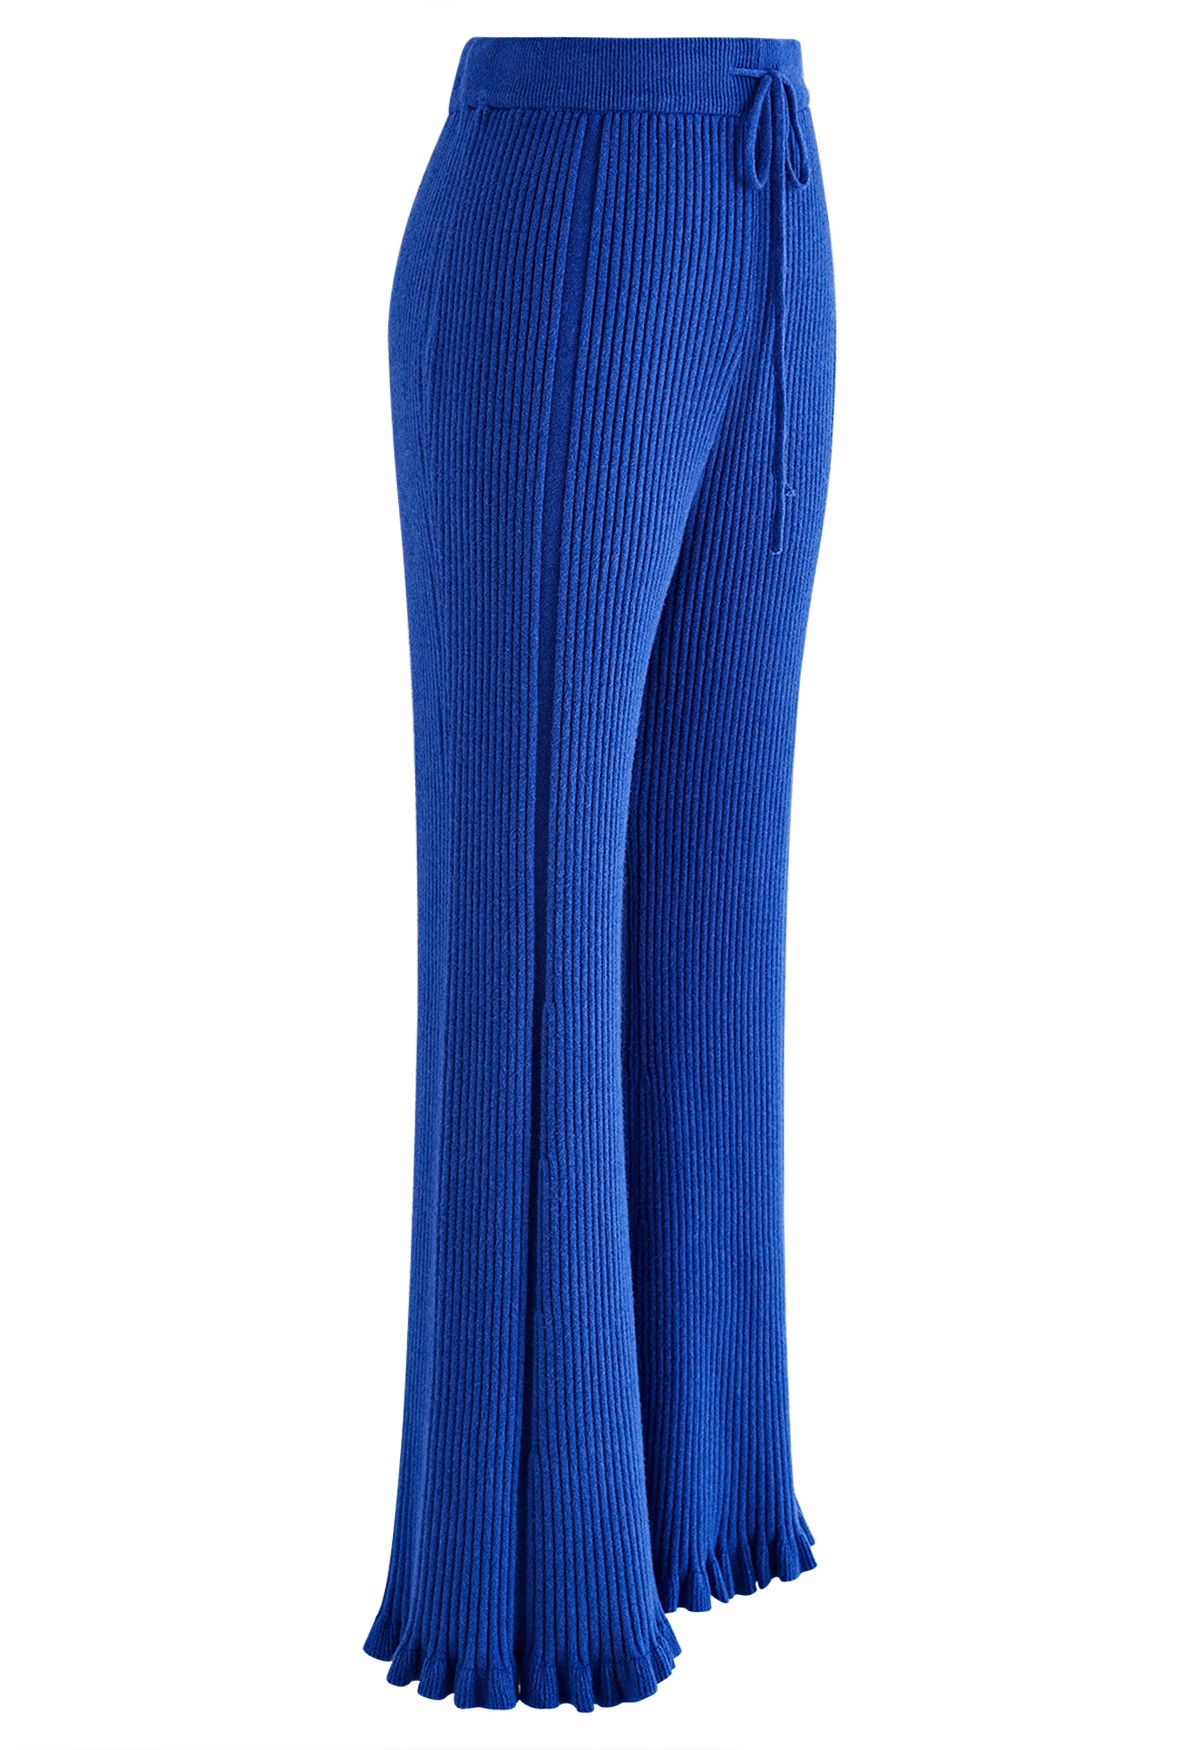 Ruffle Flare Hem Ribbed Knit Pants in Indigo - Retro, Indie and Unique  Fashion